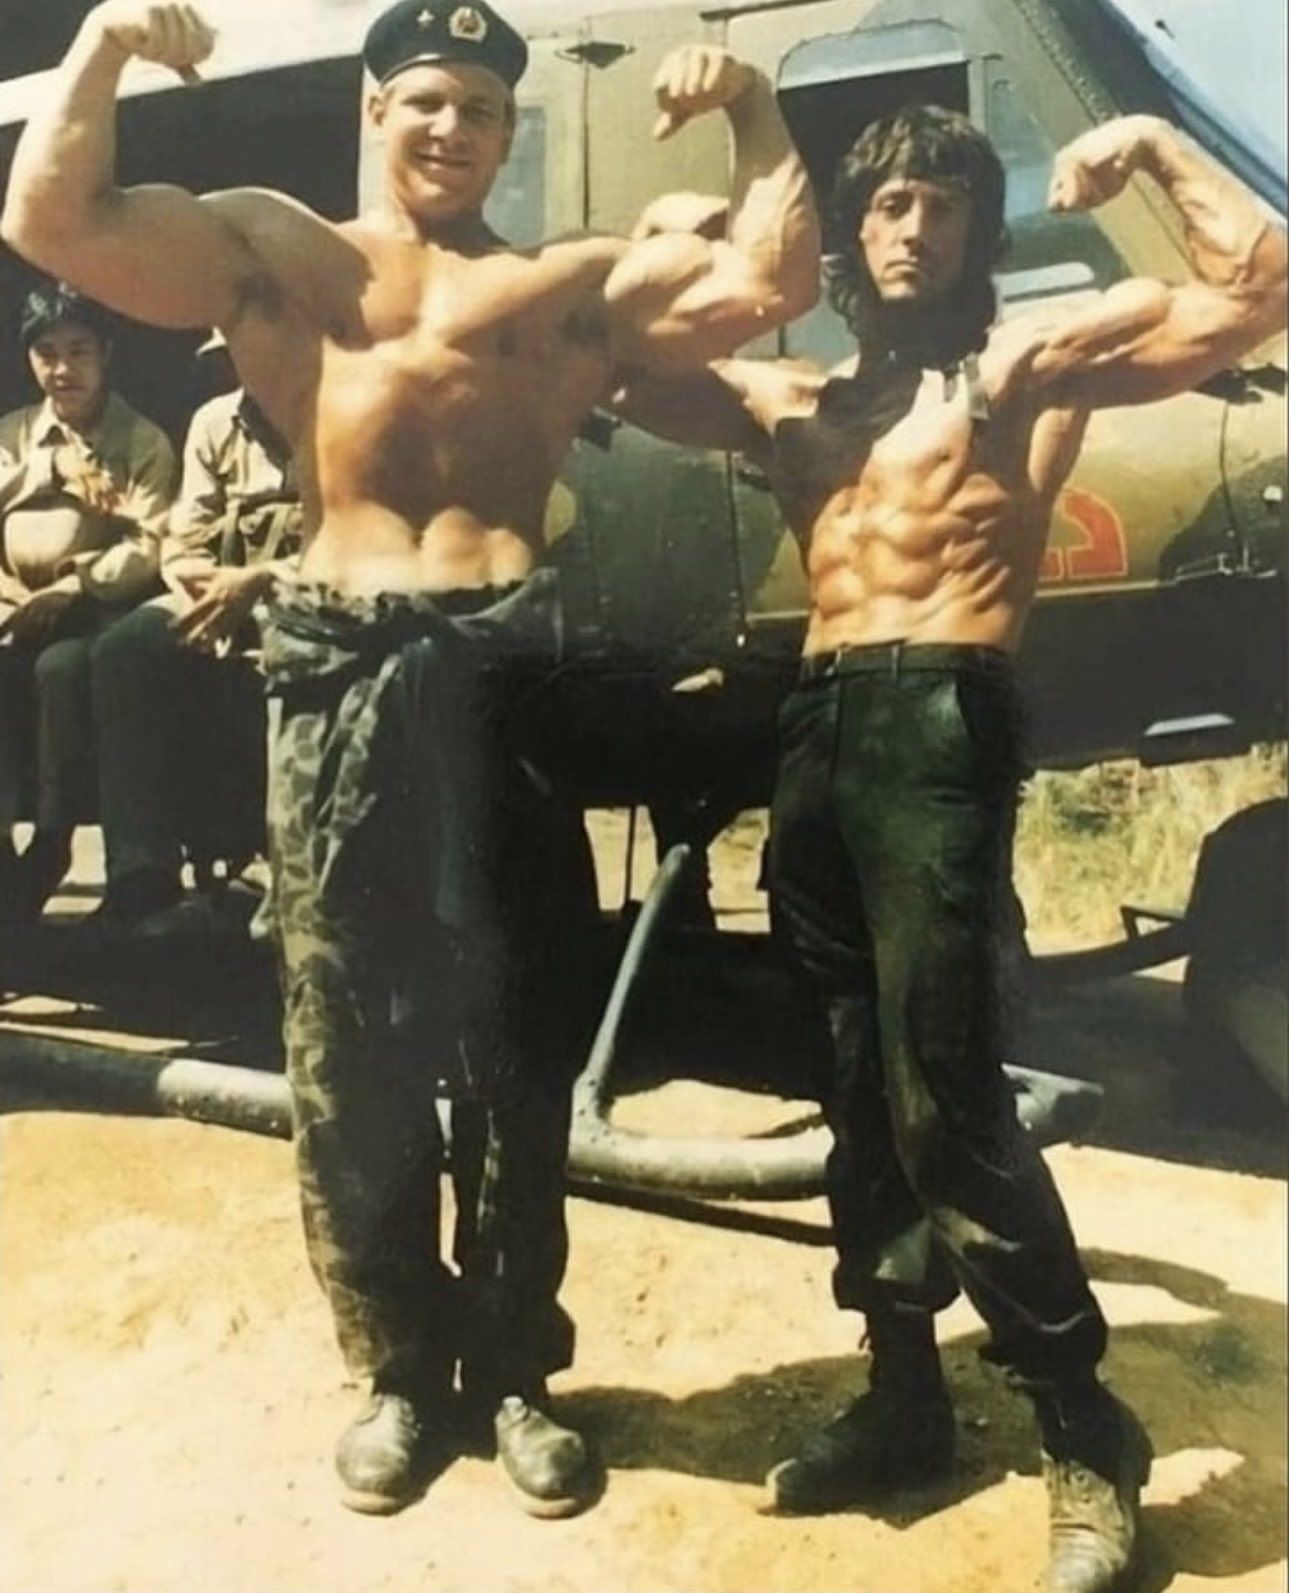 My dad and a very close friend in Vietnam 1971. Didn’t know this photo existed of him until my grandma passed and I was cleaning off dust from an old album. He cried when he saw it.